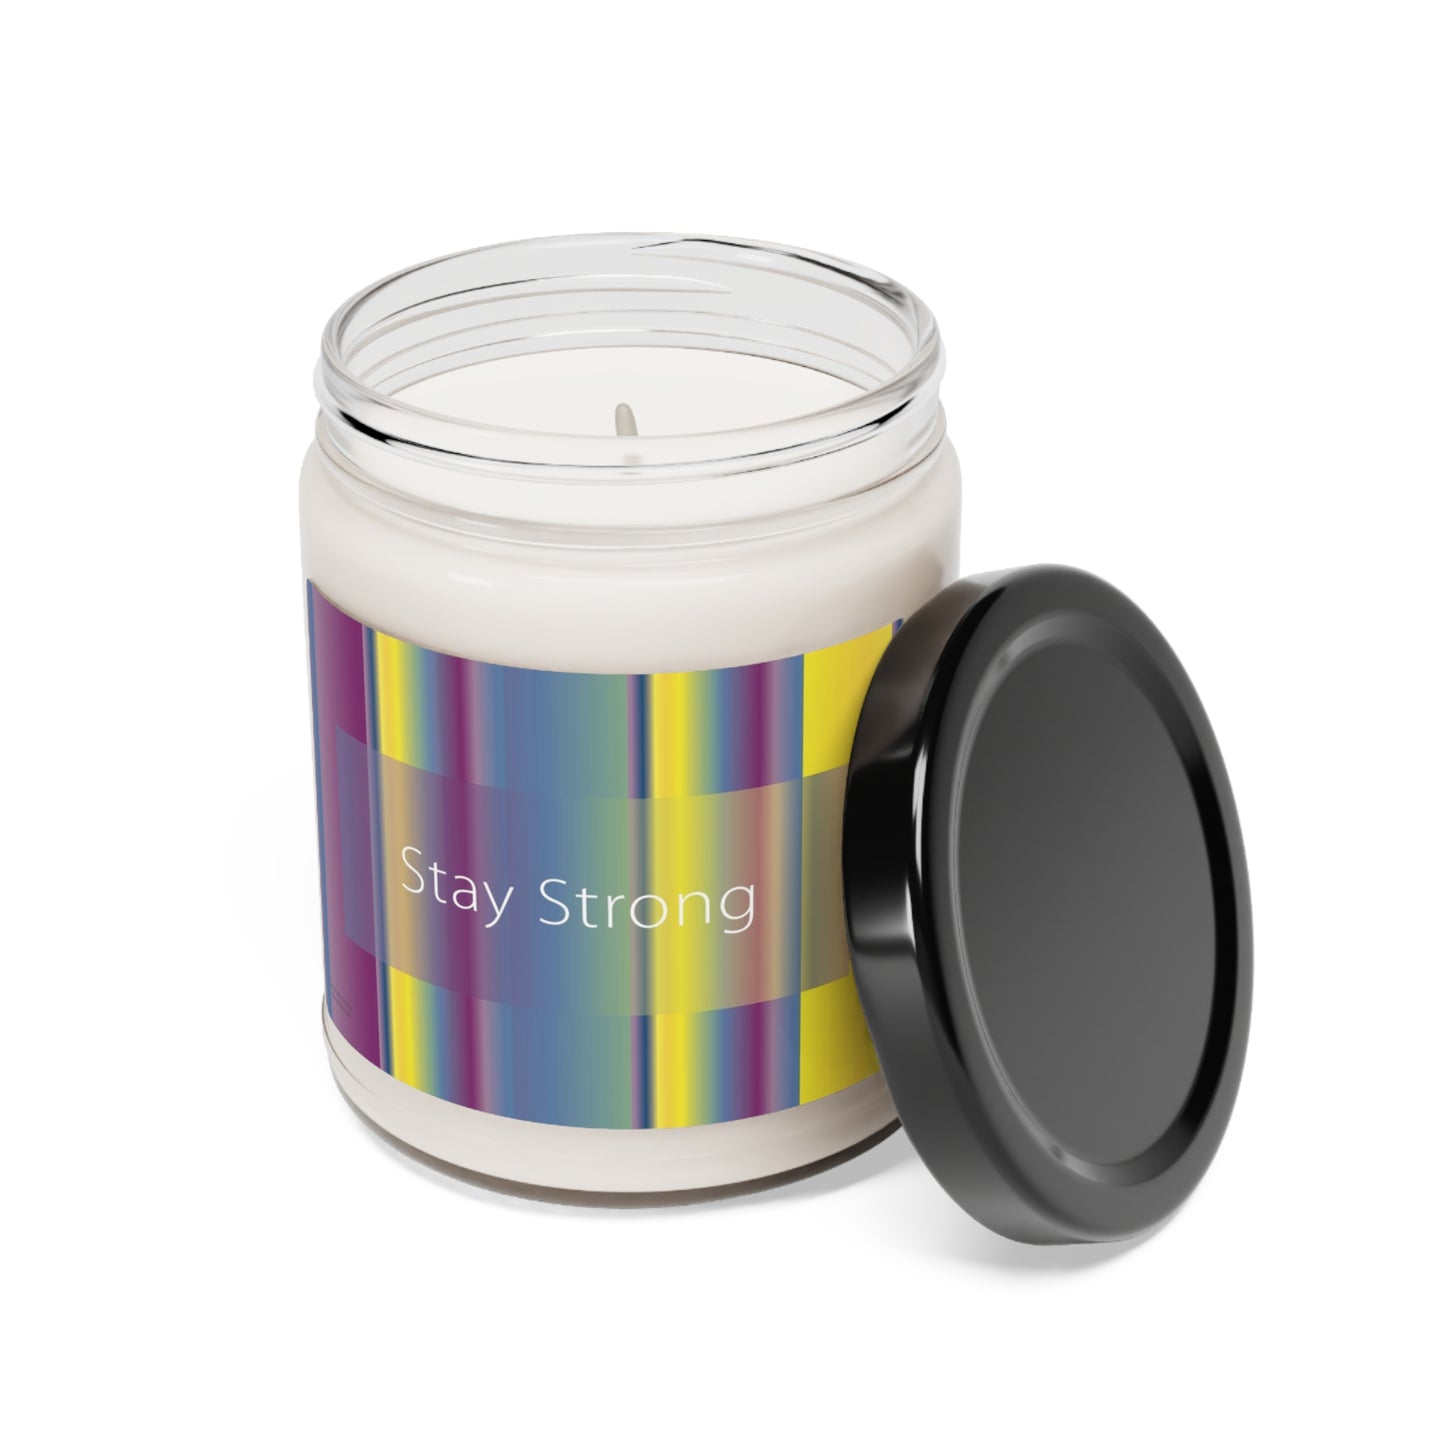 Scented Soy Candle, 9oz Stay Strong - Design No.1300